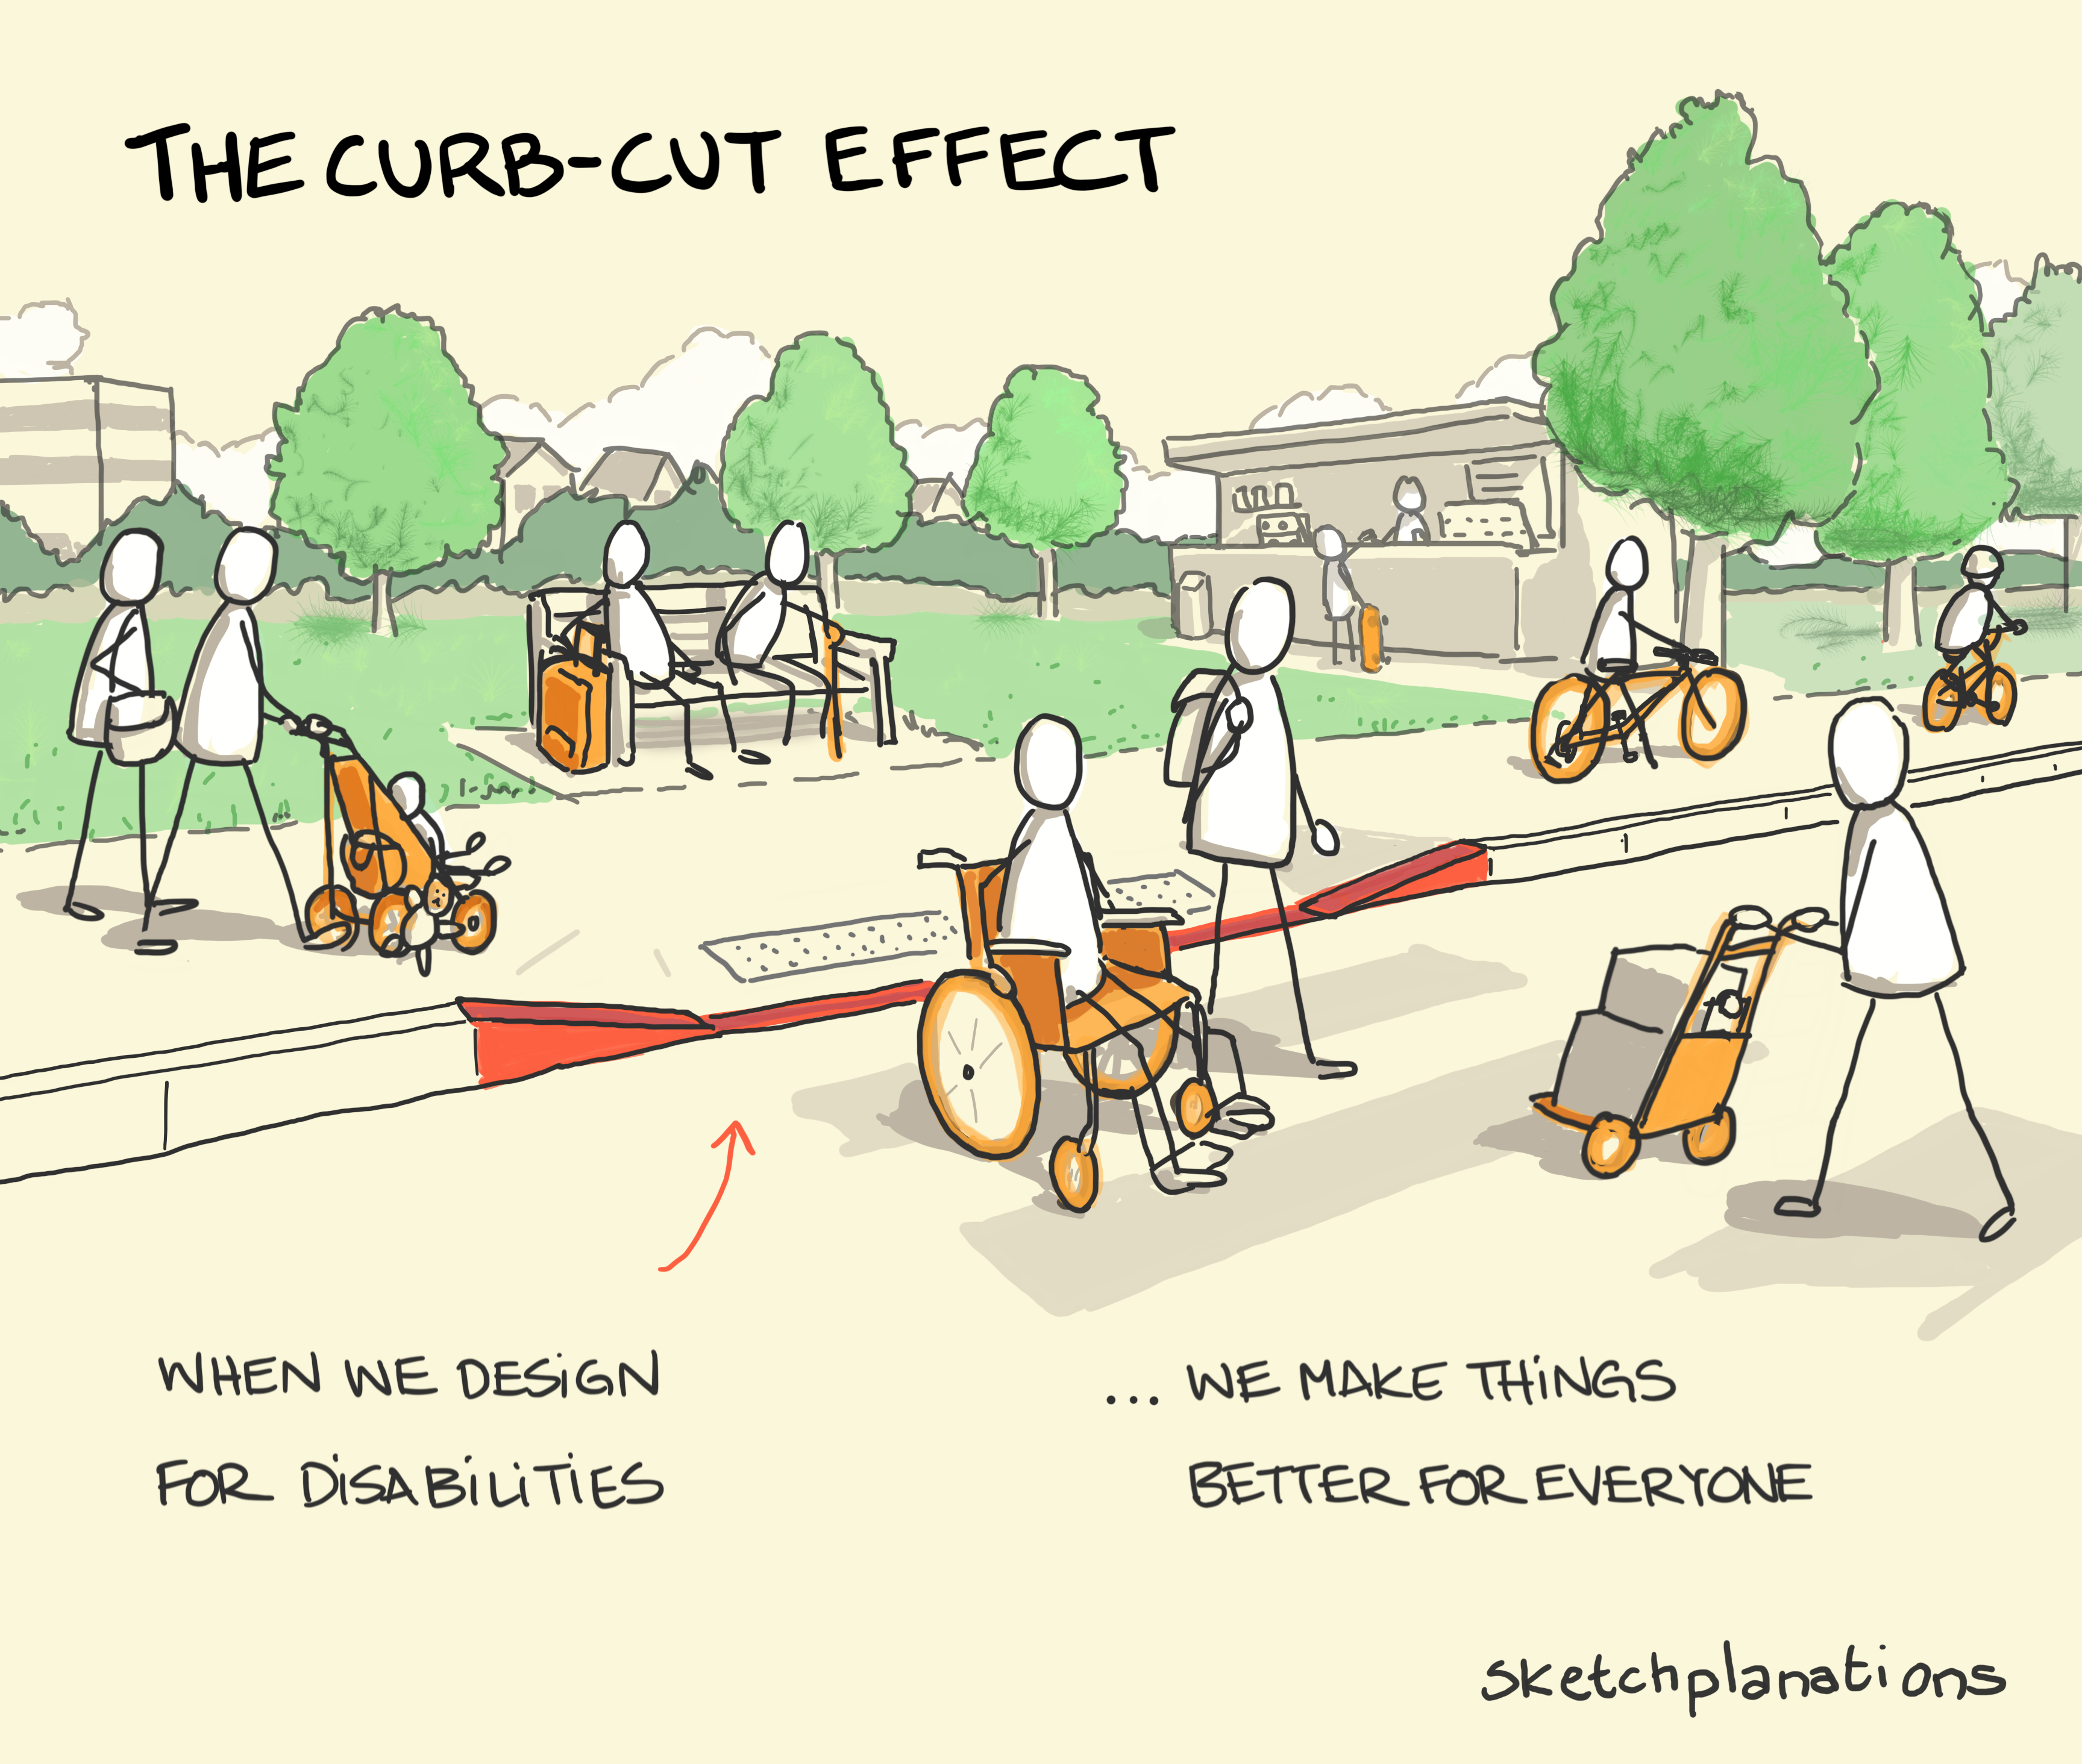 People using different wheeled devices utilising the curb cut. The picture is titled The Curb-Cut Effect and states "when we design for disabilities, we make things better for everyone."